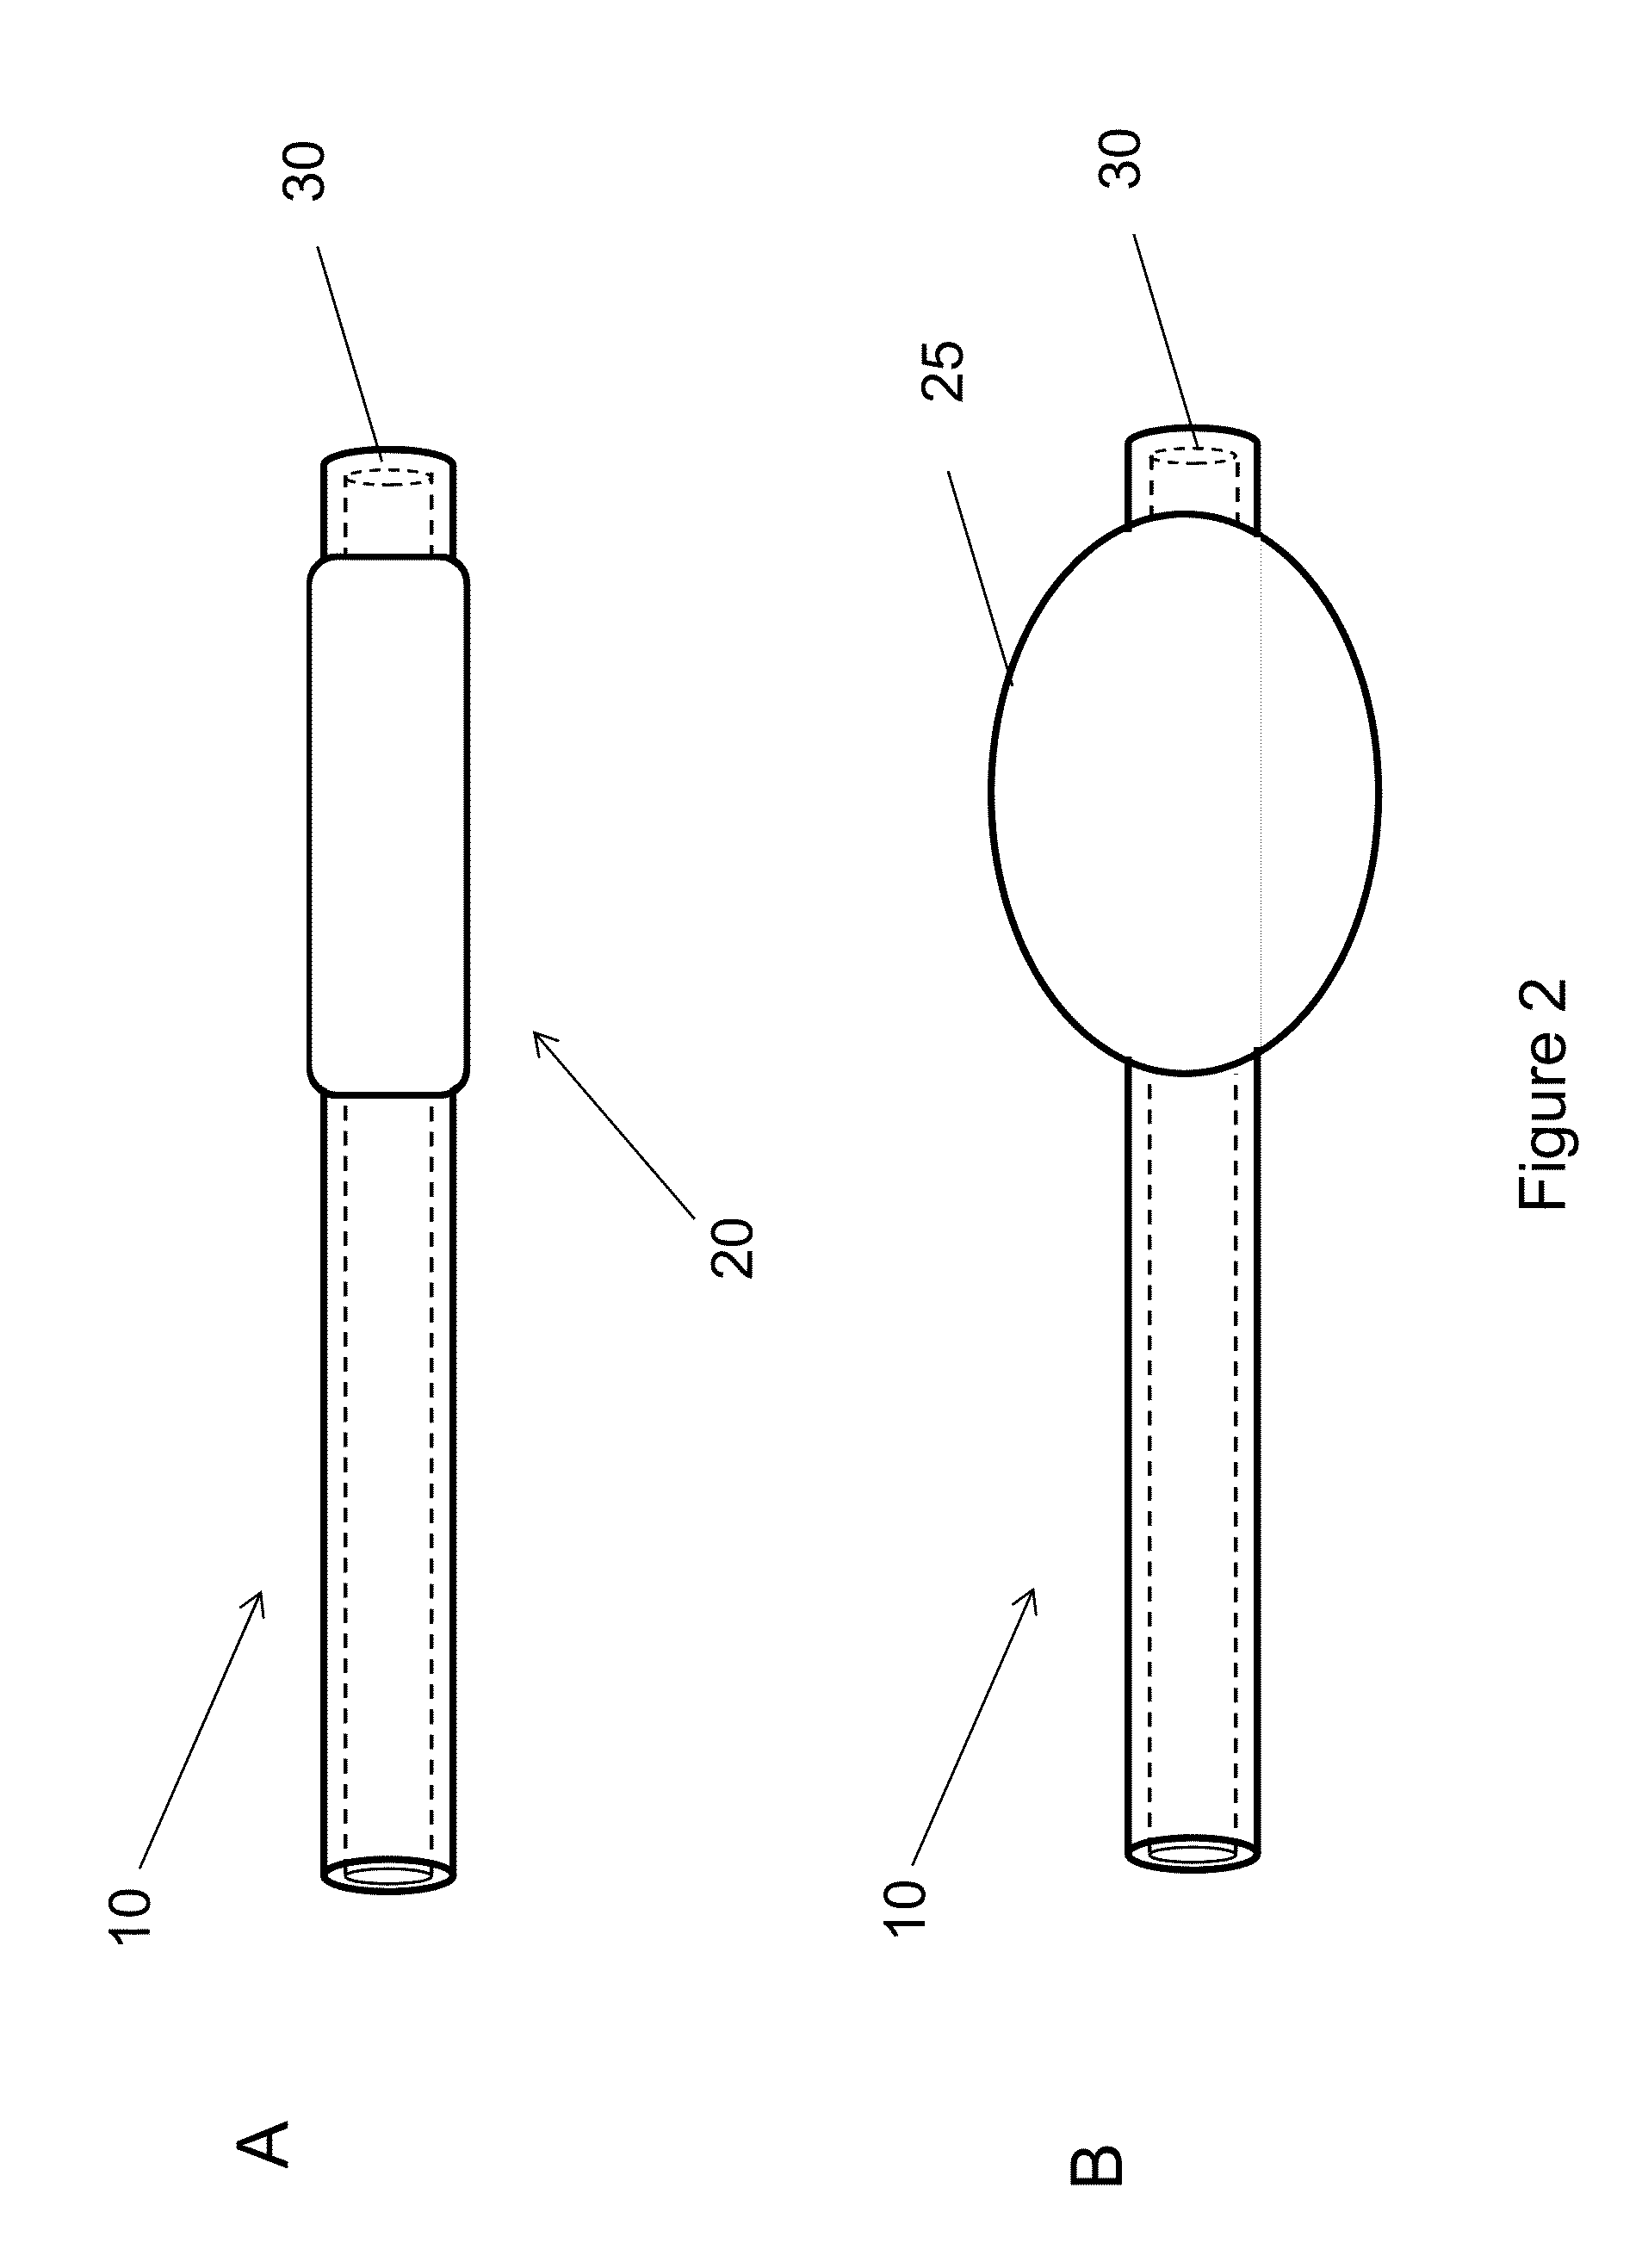 System and Method for Heart Pump Interrogation and Inspection